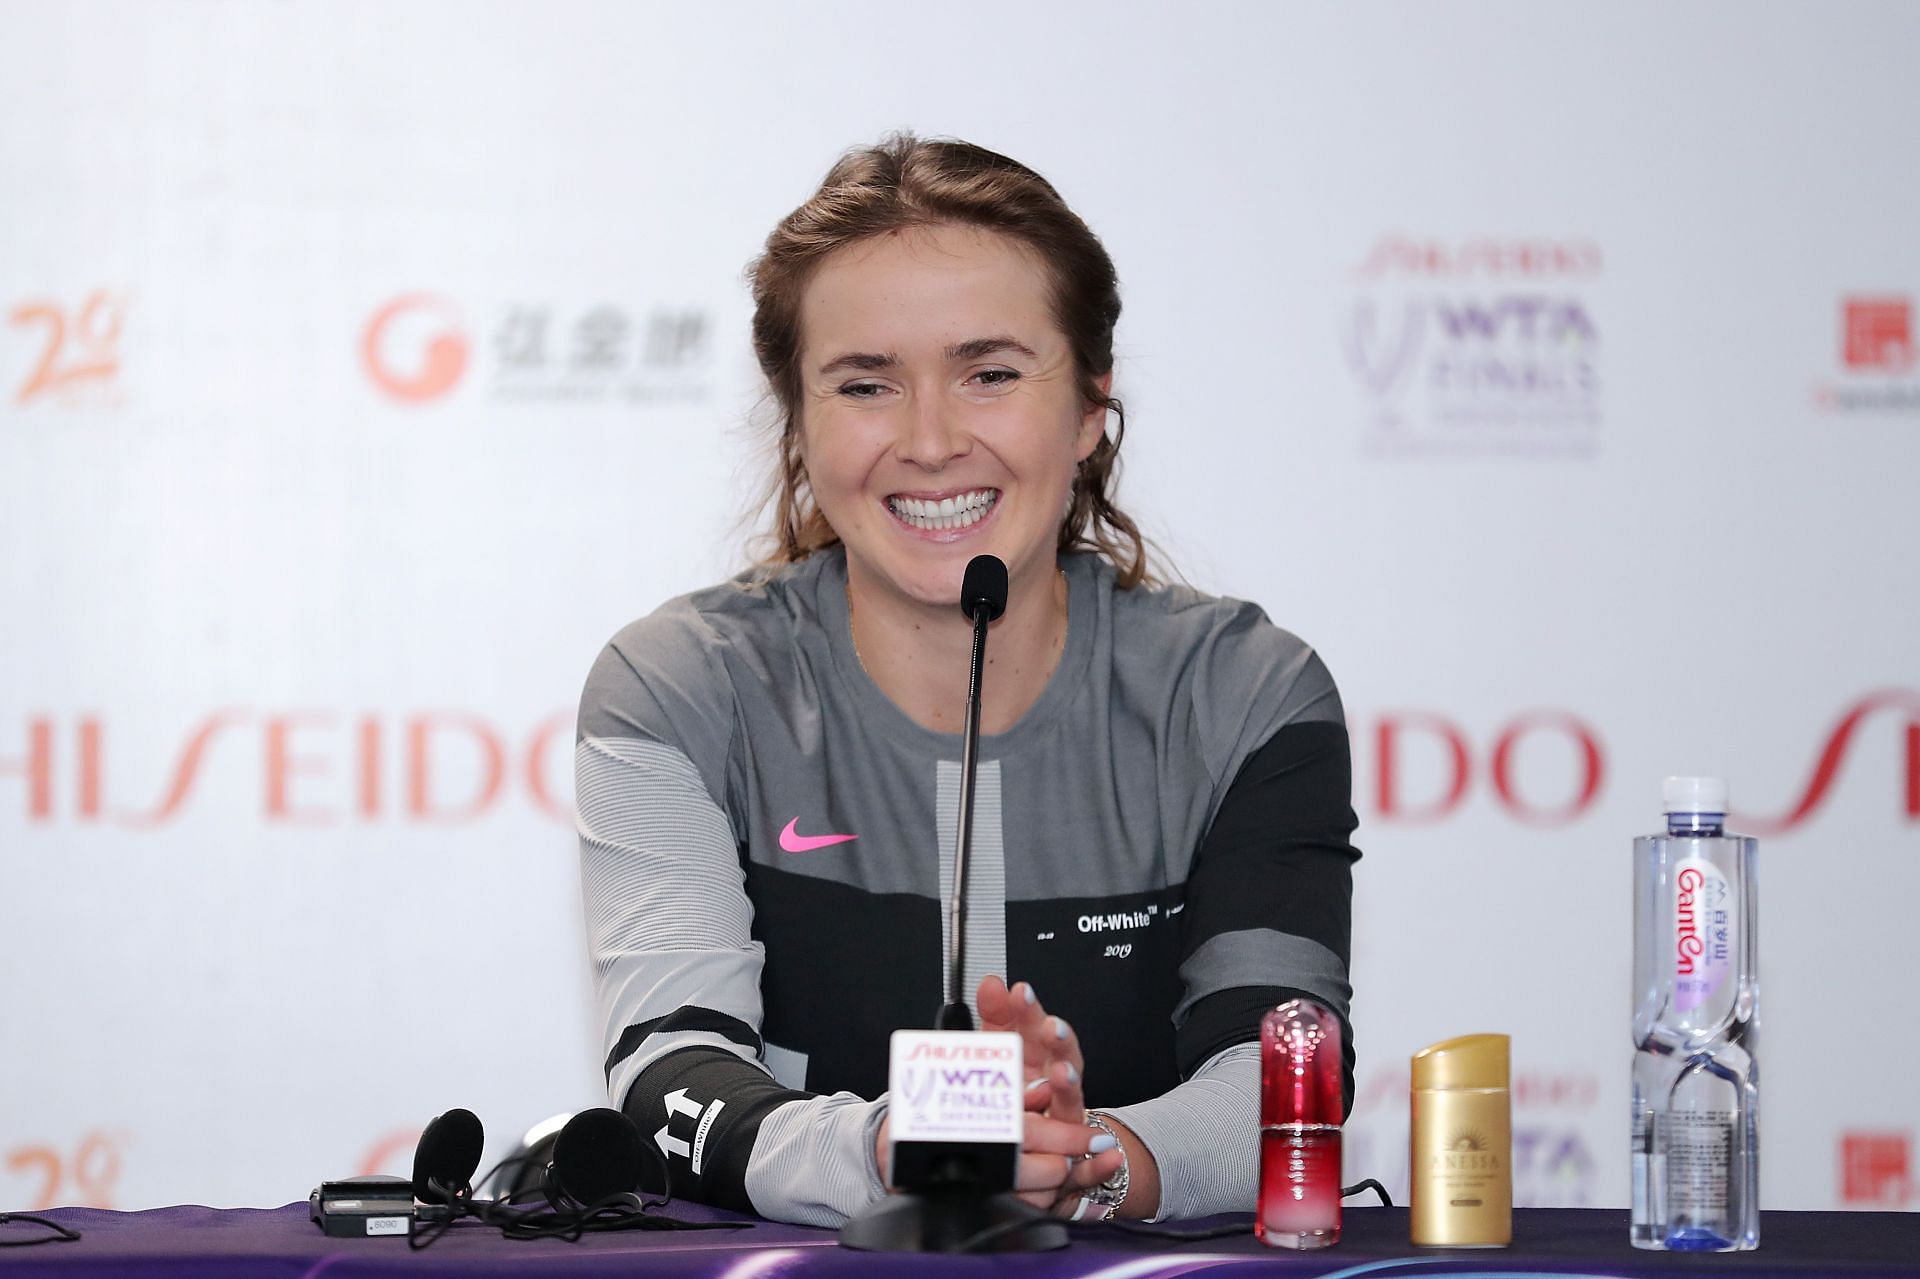 Elina Svitolina has said that all Russian and Belarusian should not be banned from competing